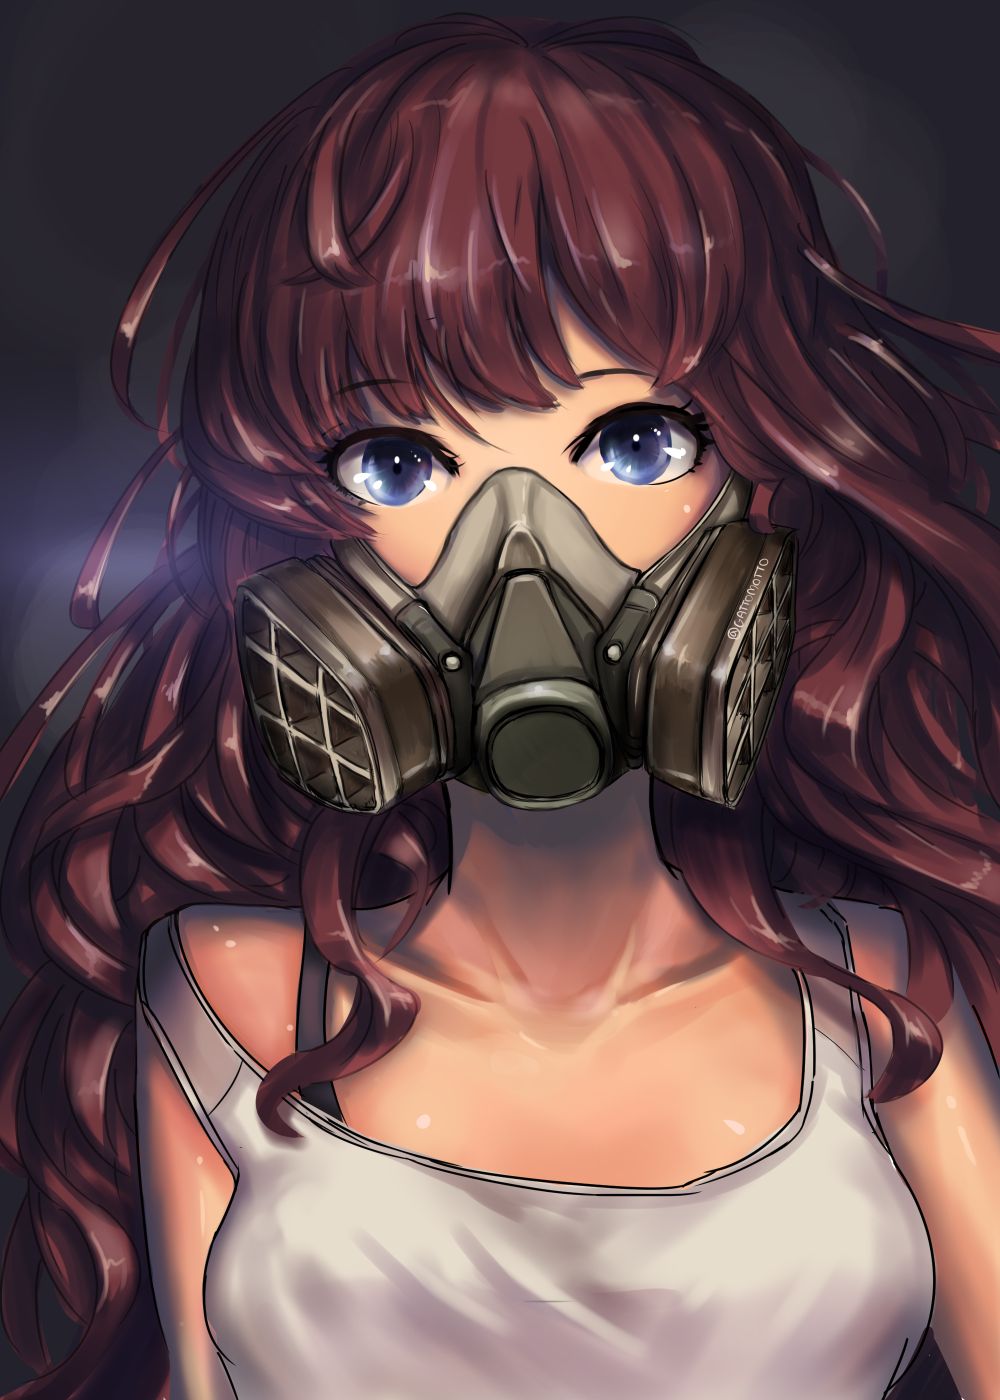 Download Digital Anime Girl With Gas Mask Wallpaper | Wallpapers.com